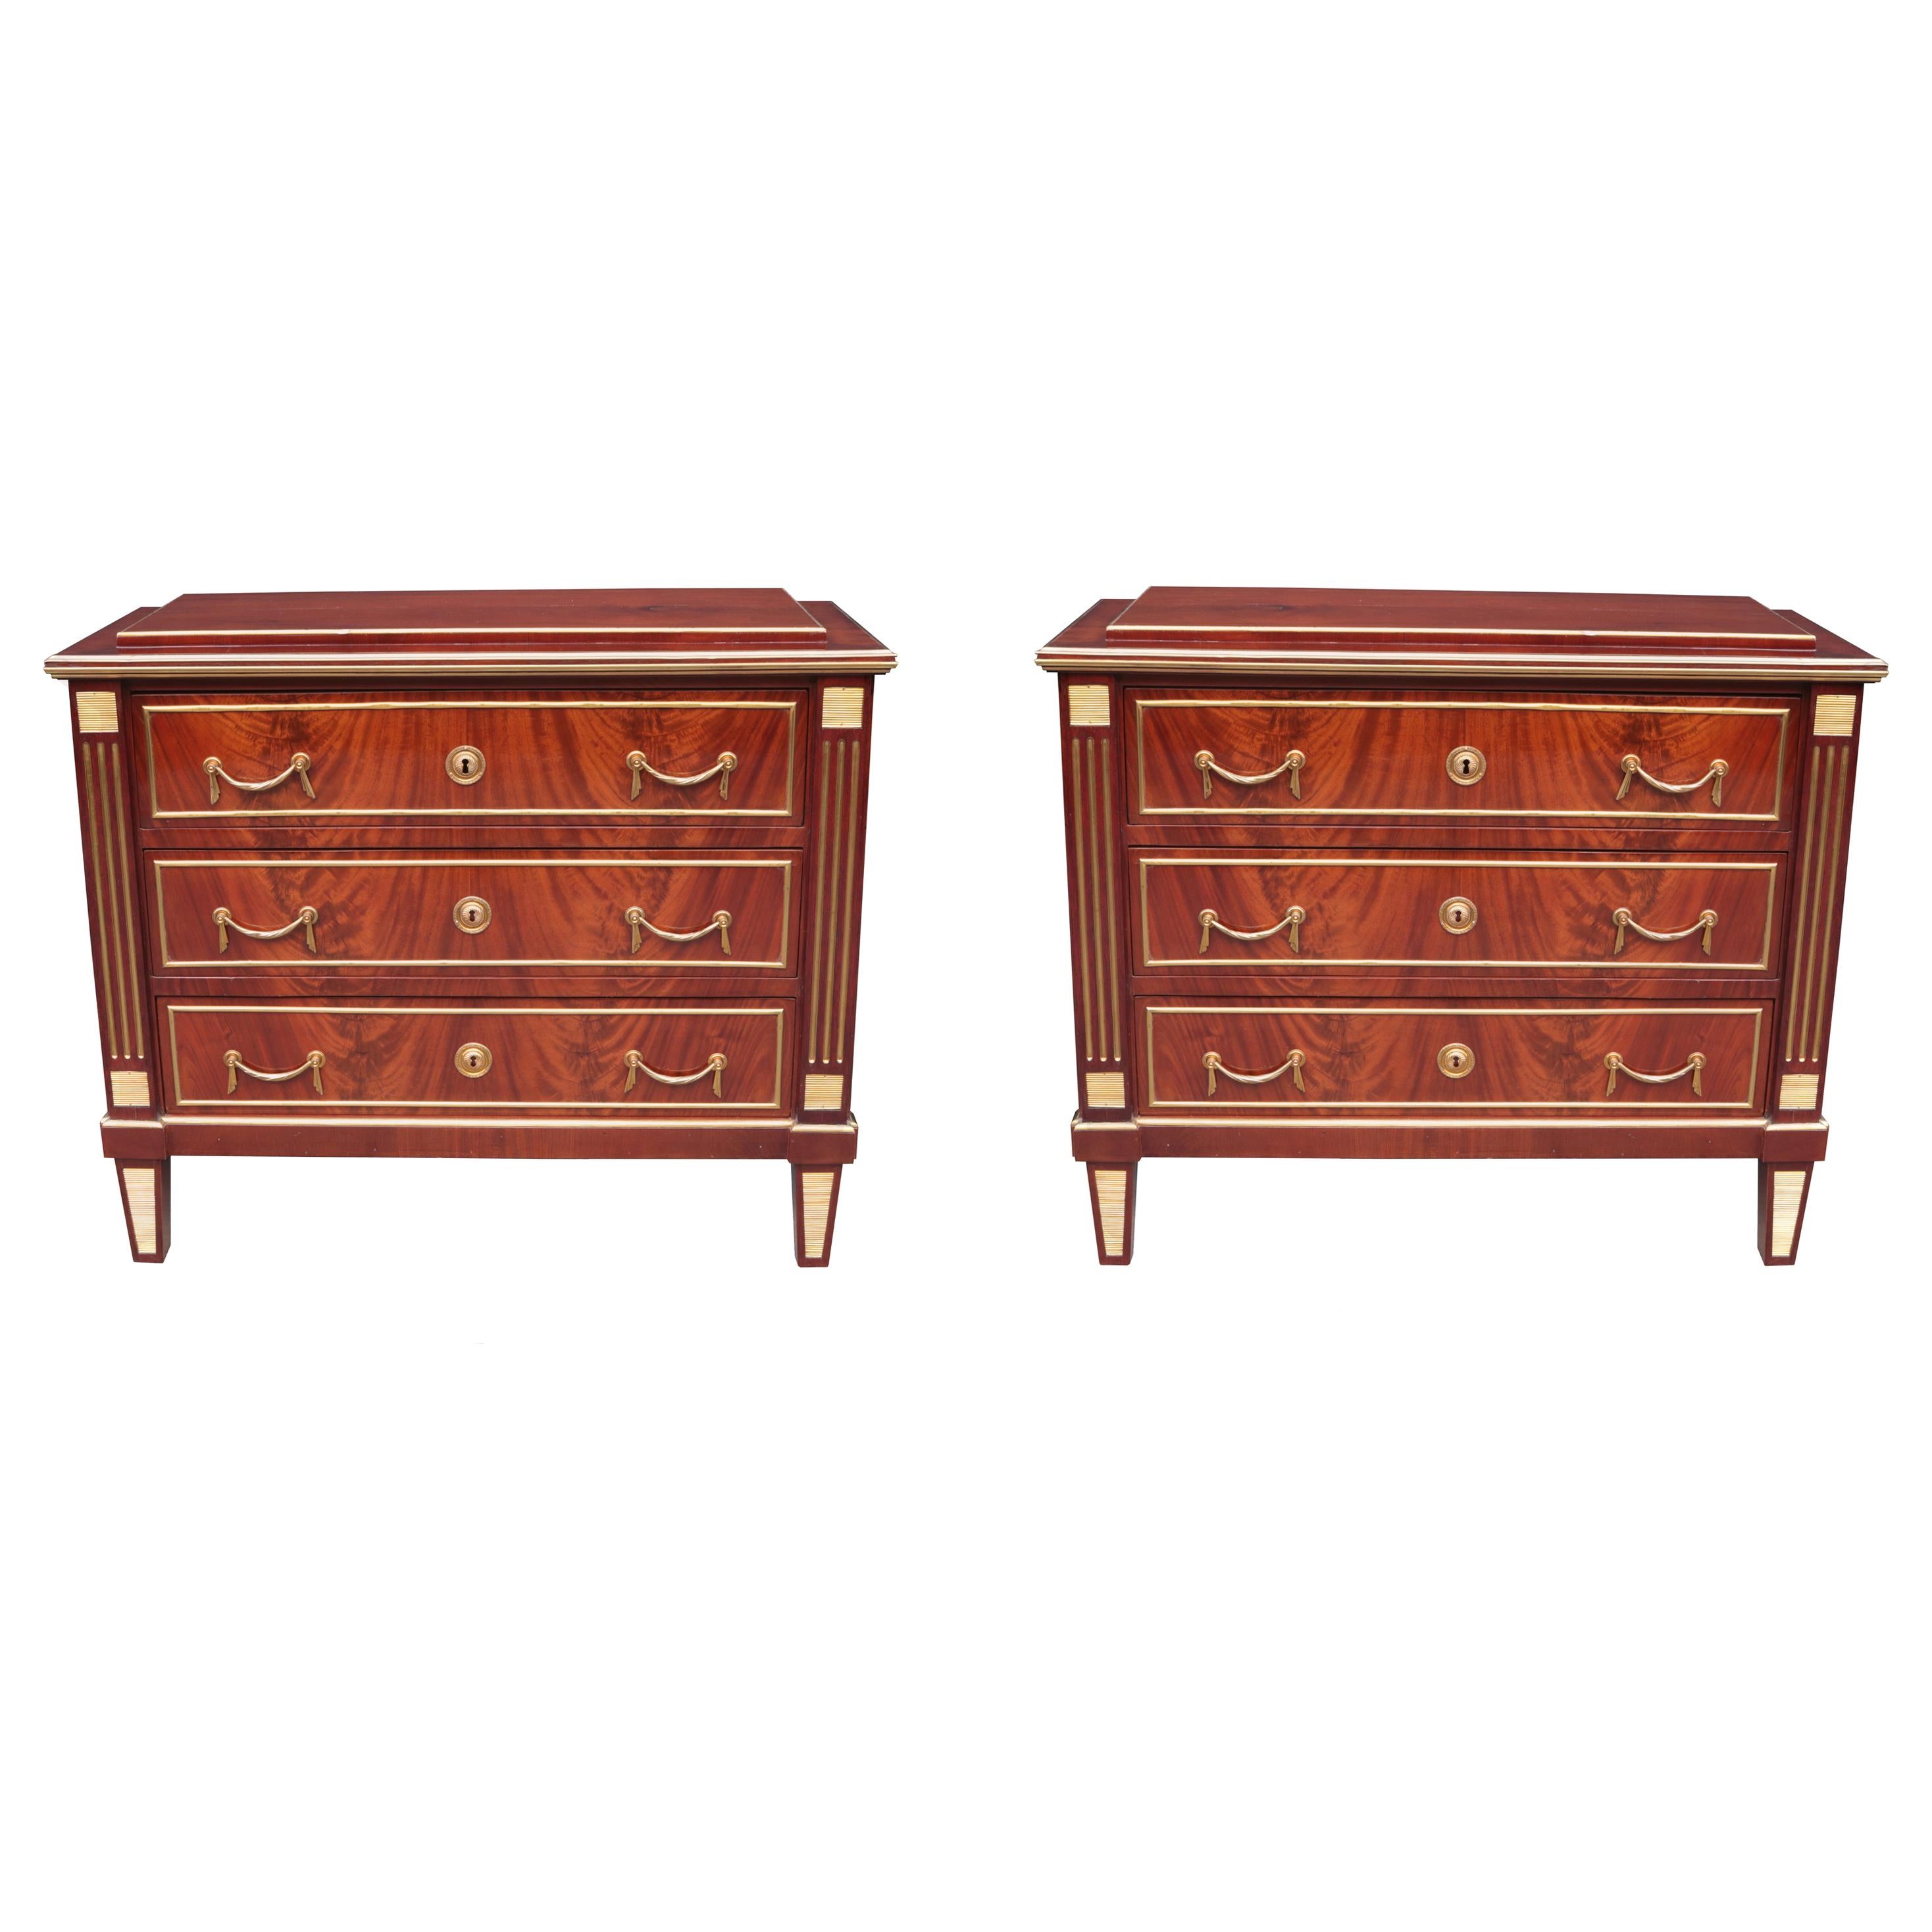 Neoclassical Style Pair of Chests